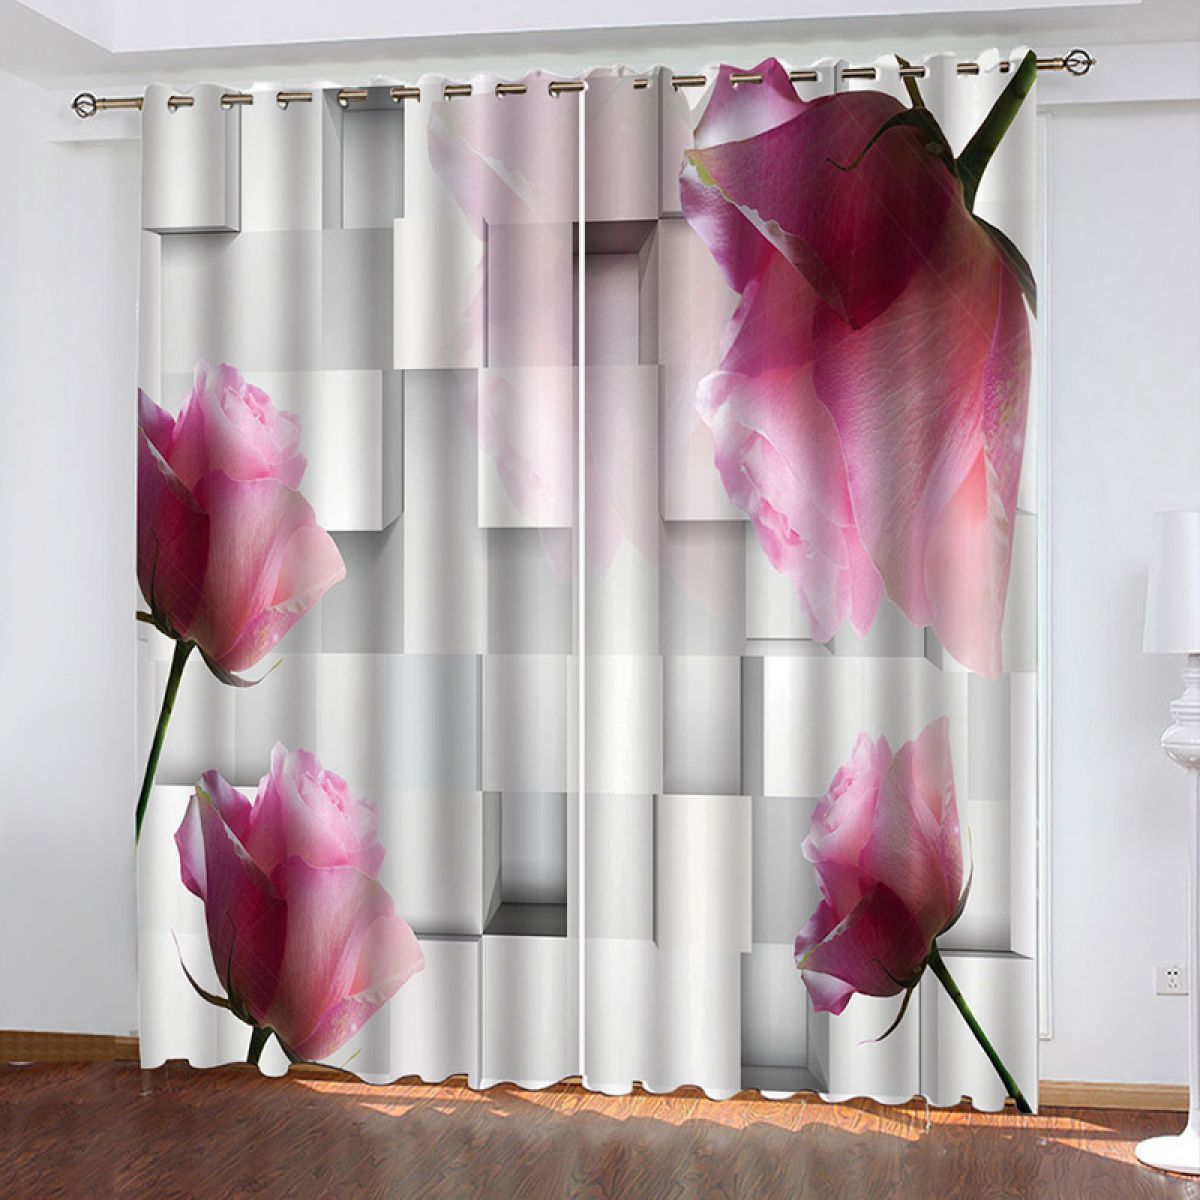 modern 3d geometric and roses printed window curtain home decor 3104